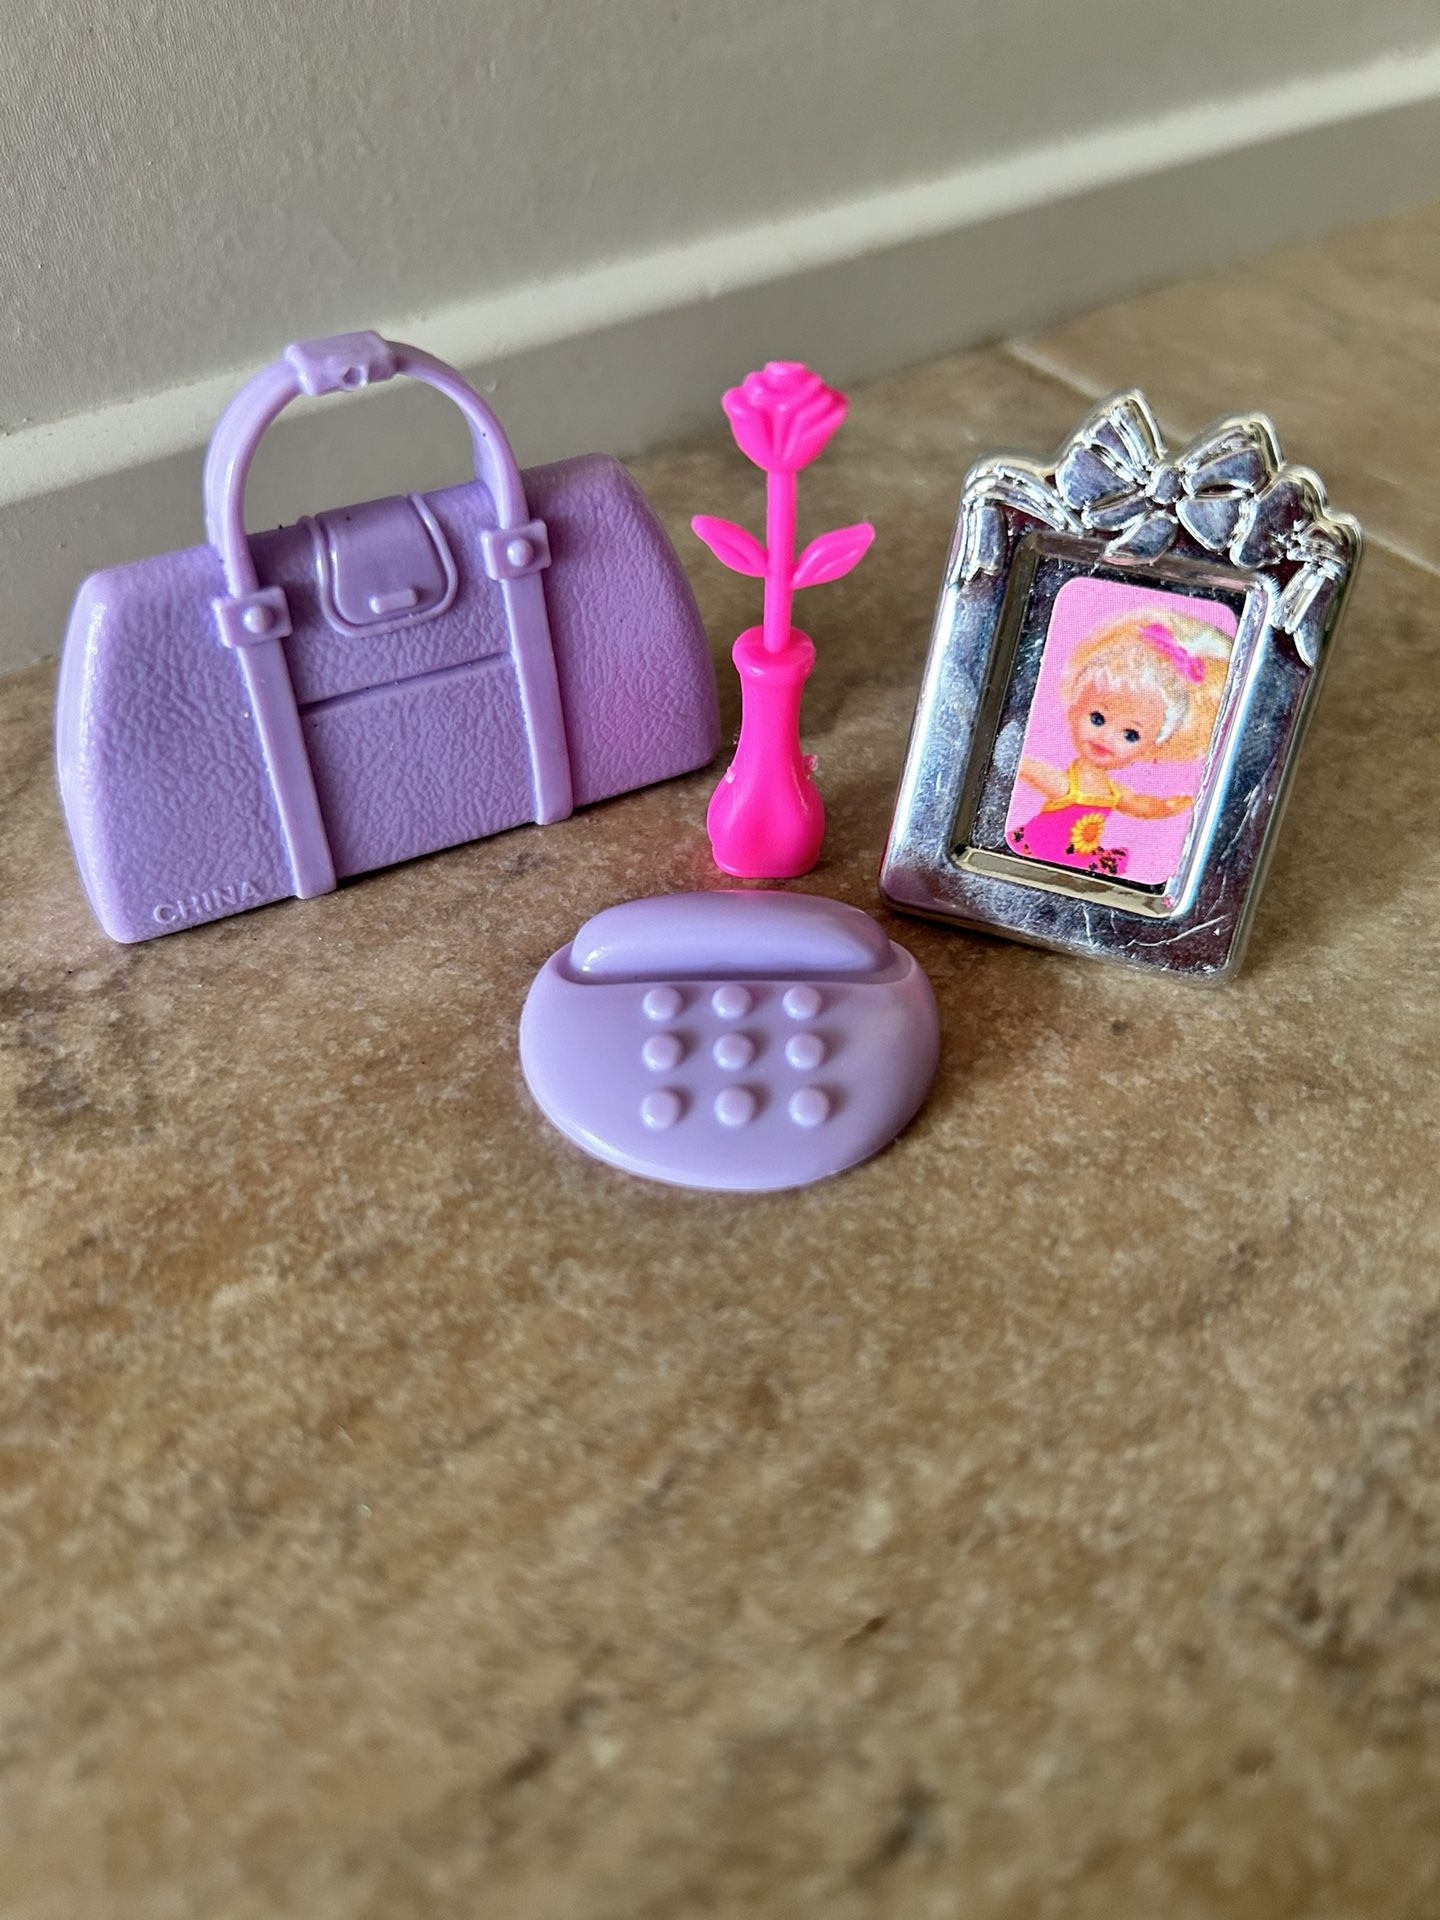 Vintage Barbie Accessory - Pink Flower In A Vase, Phone, Purse, & Picture Frame